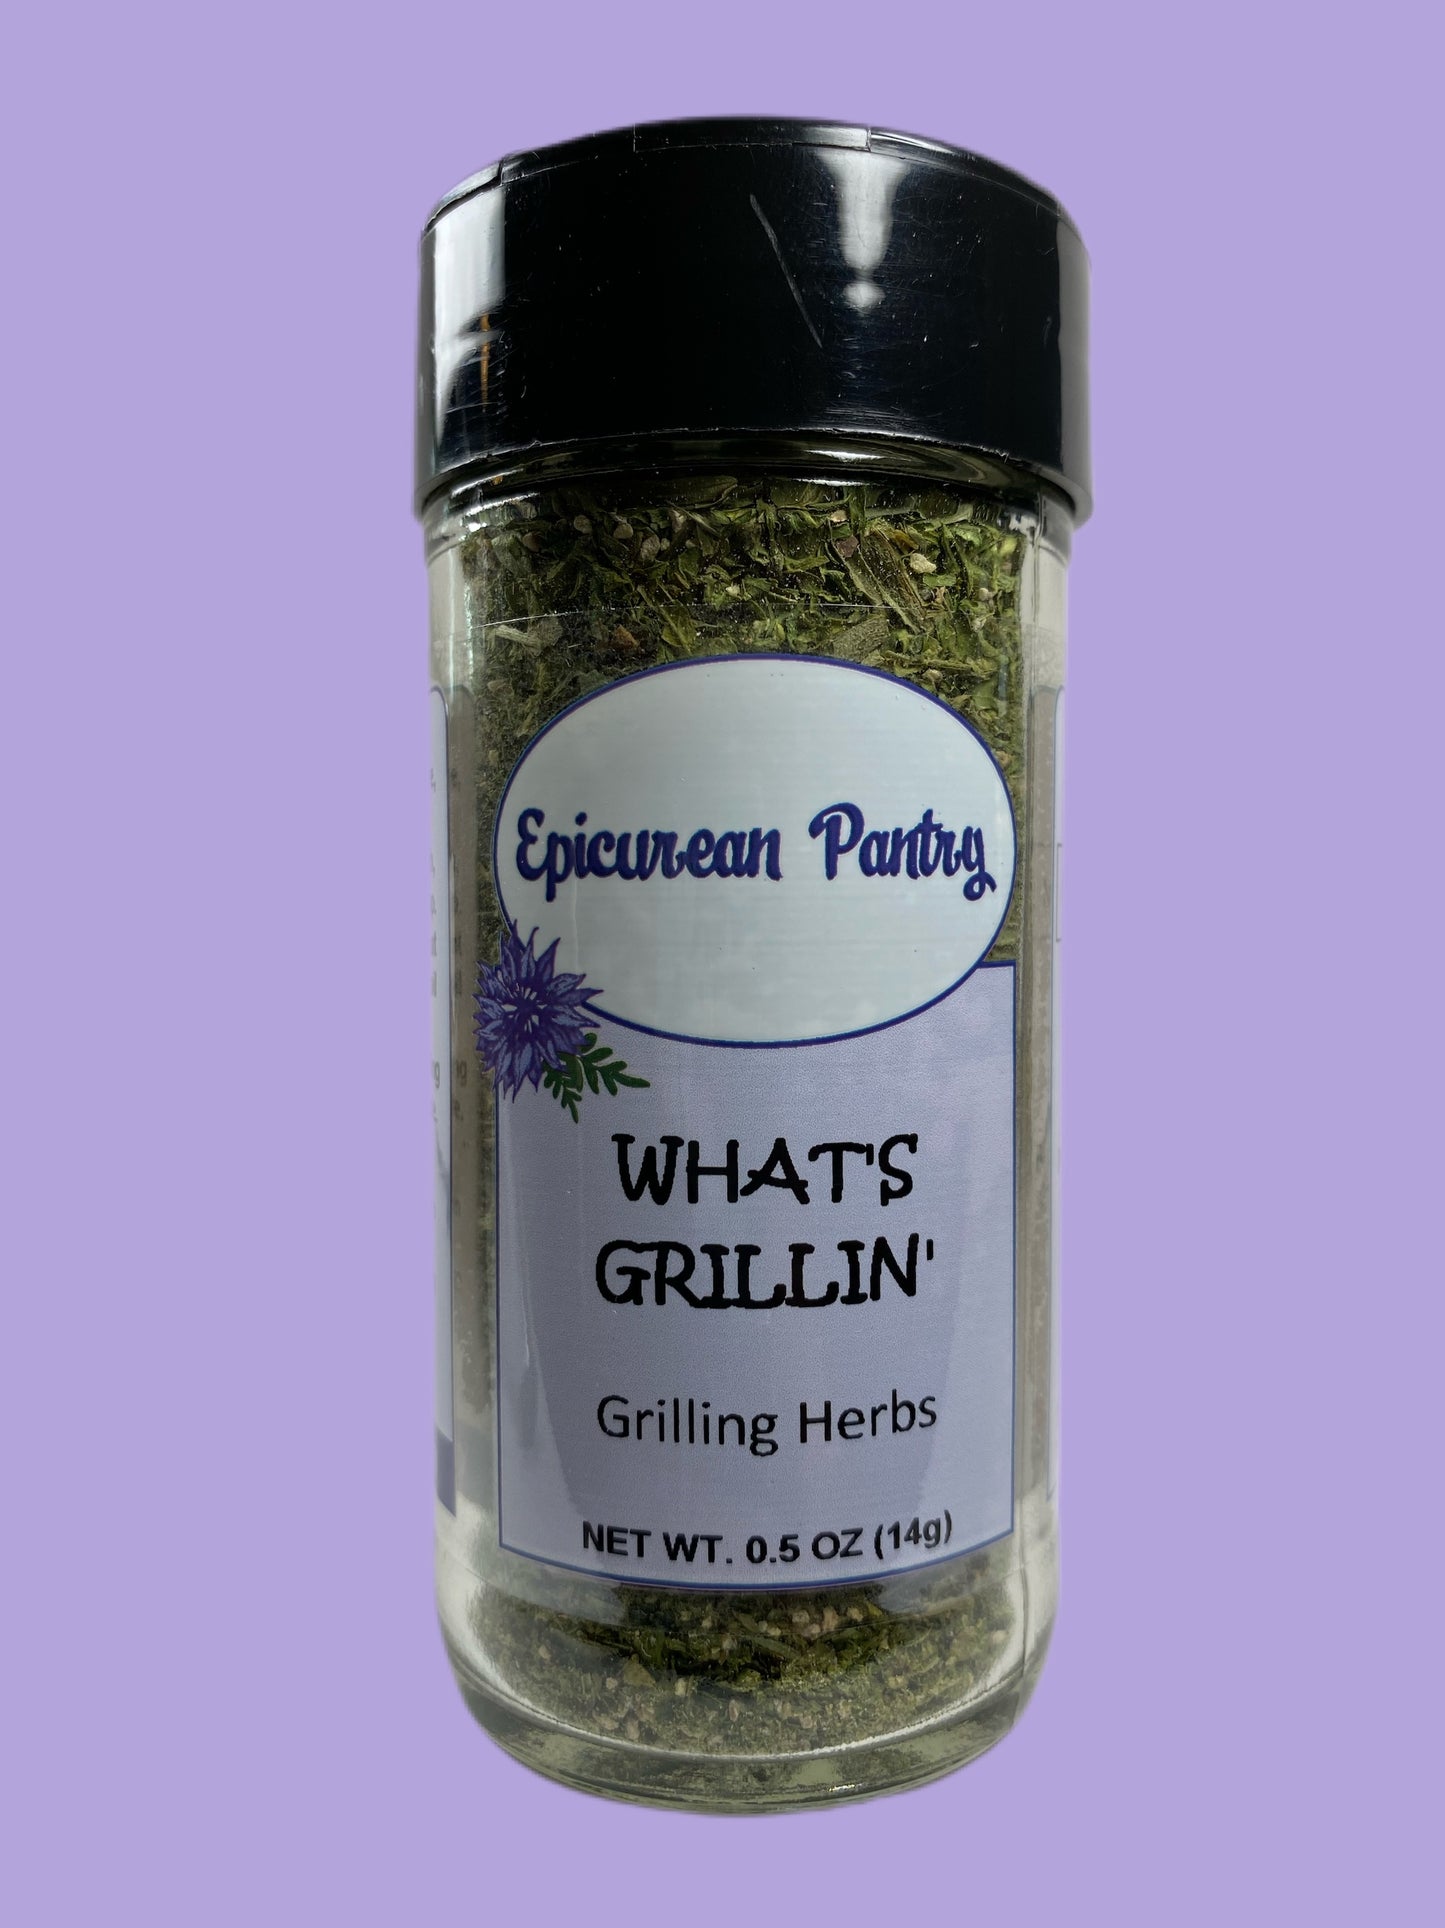 What's Grillin' - Grilling Herbs - .5 oz net wt